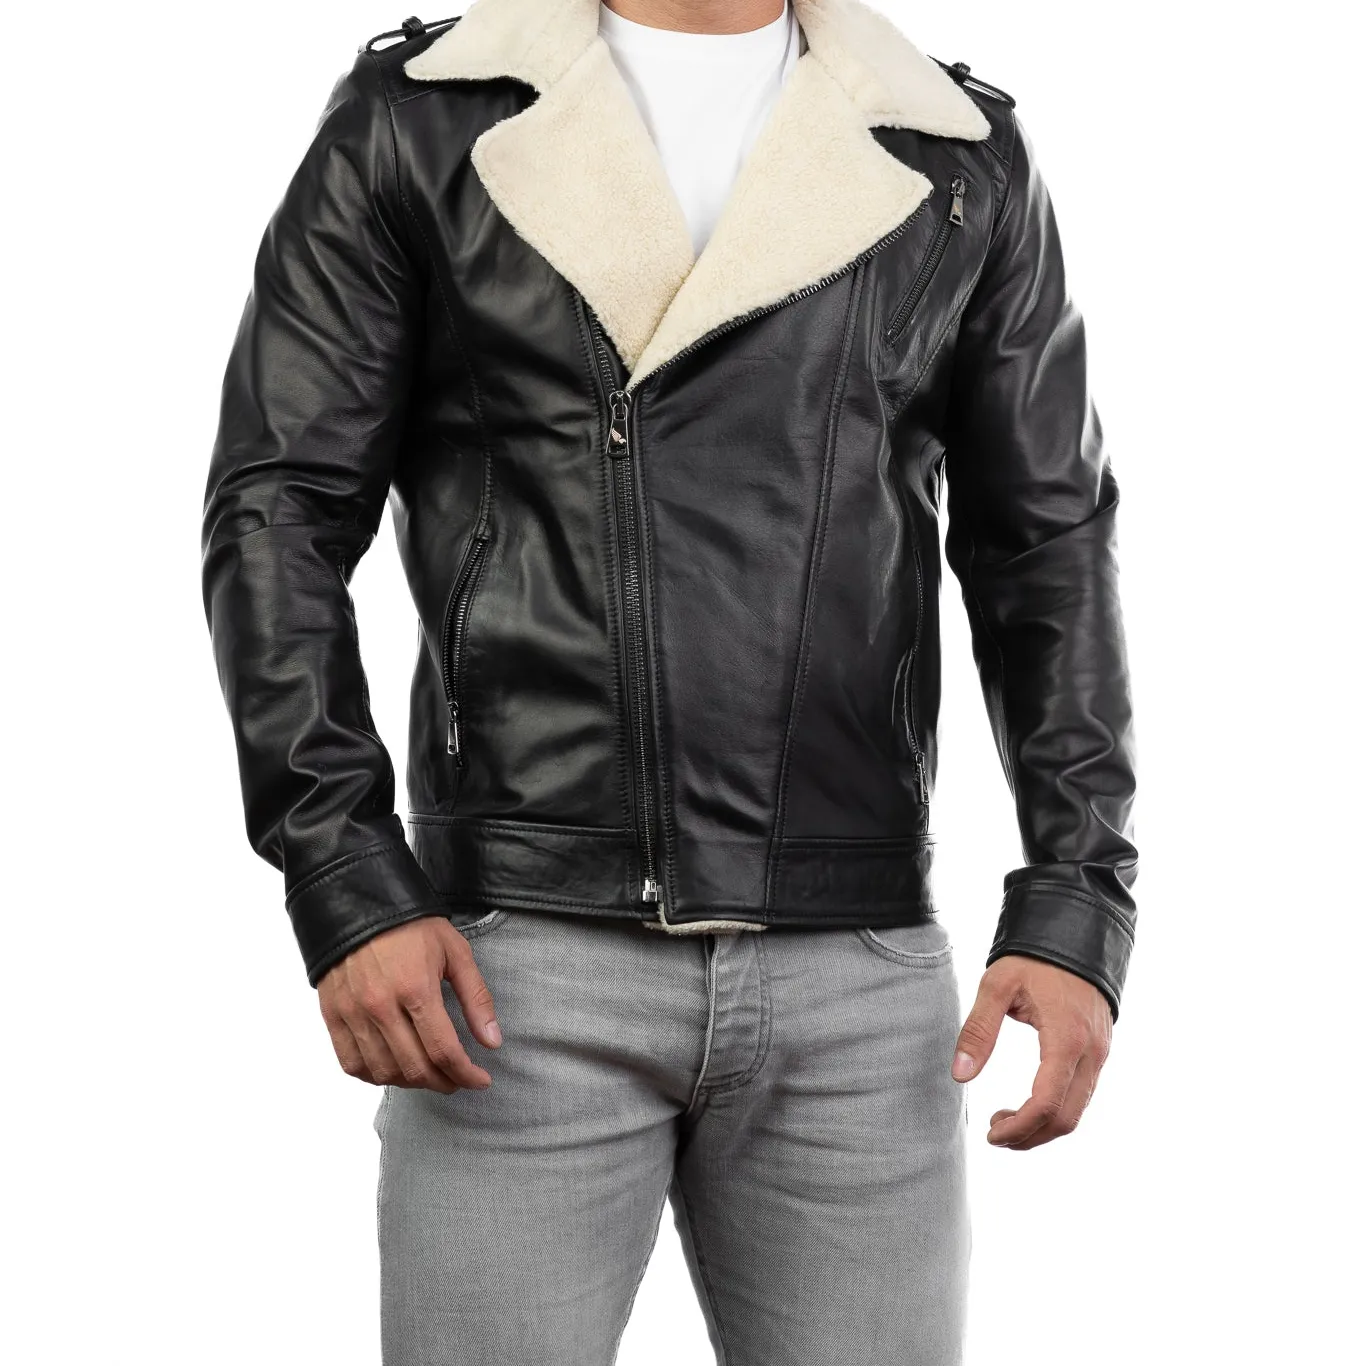 Entusiast Man LeatherJacket Genuine lambskin With Zip curly fur padding Custpmizable - Handcrafted in Italy